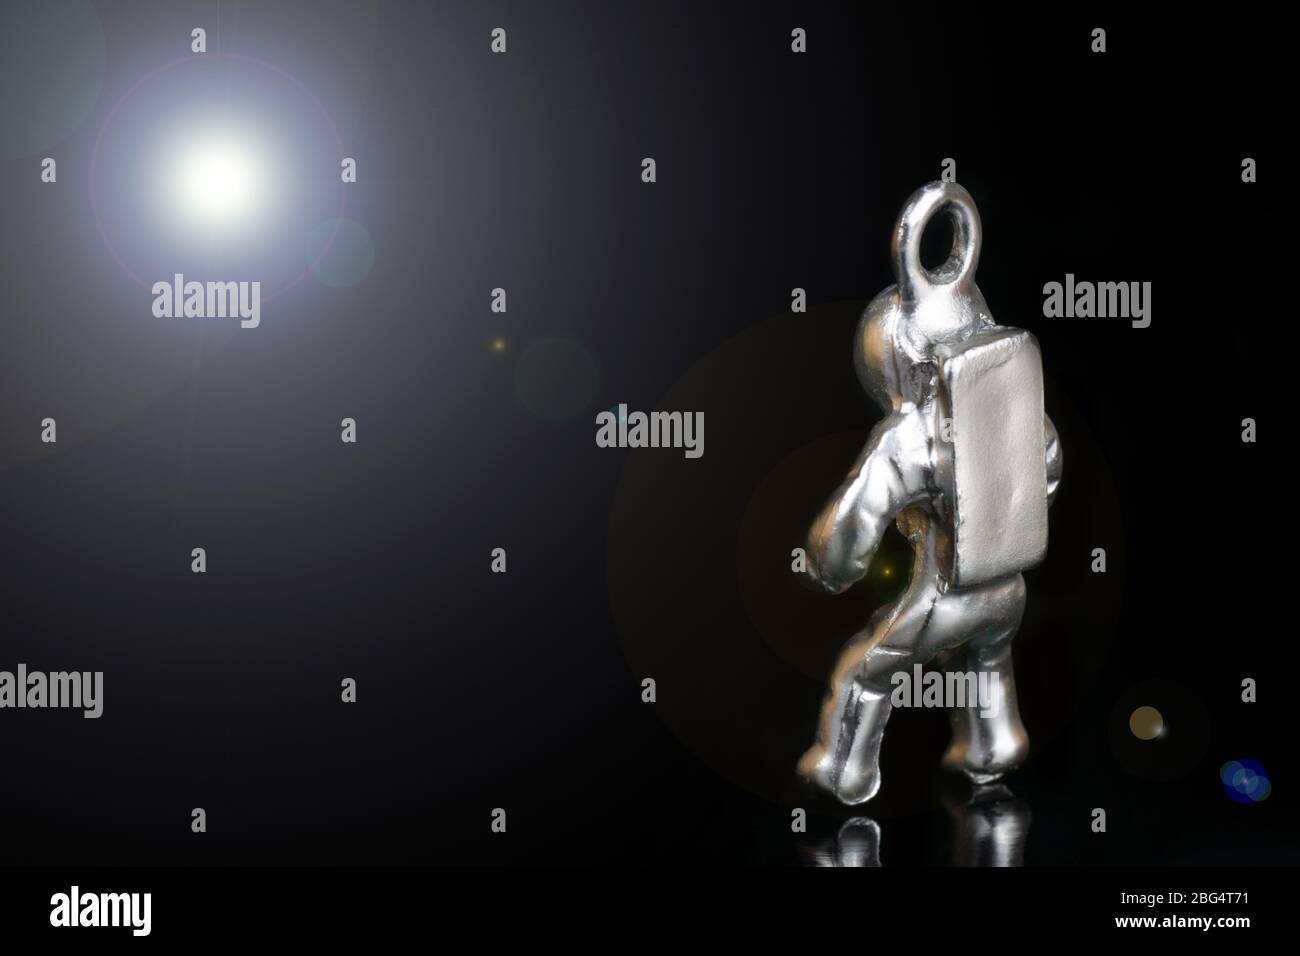 Tiny steel figurine of an astronaut looking at the light of a distant star. Close-up shot, isolated on black, lens flare. Stock Photo